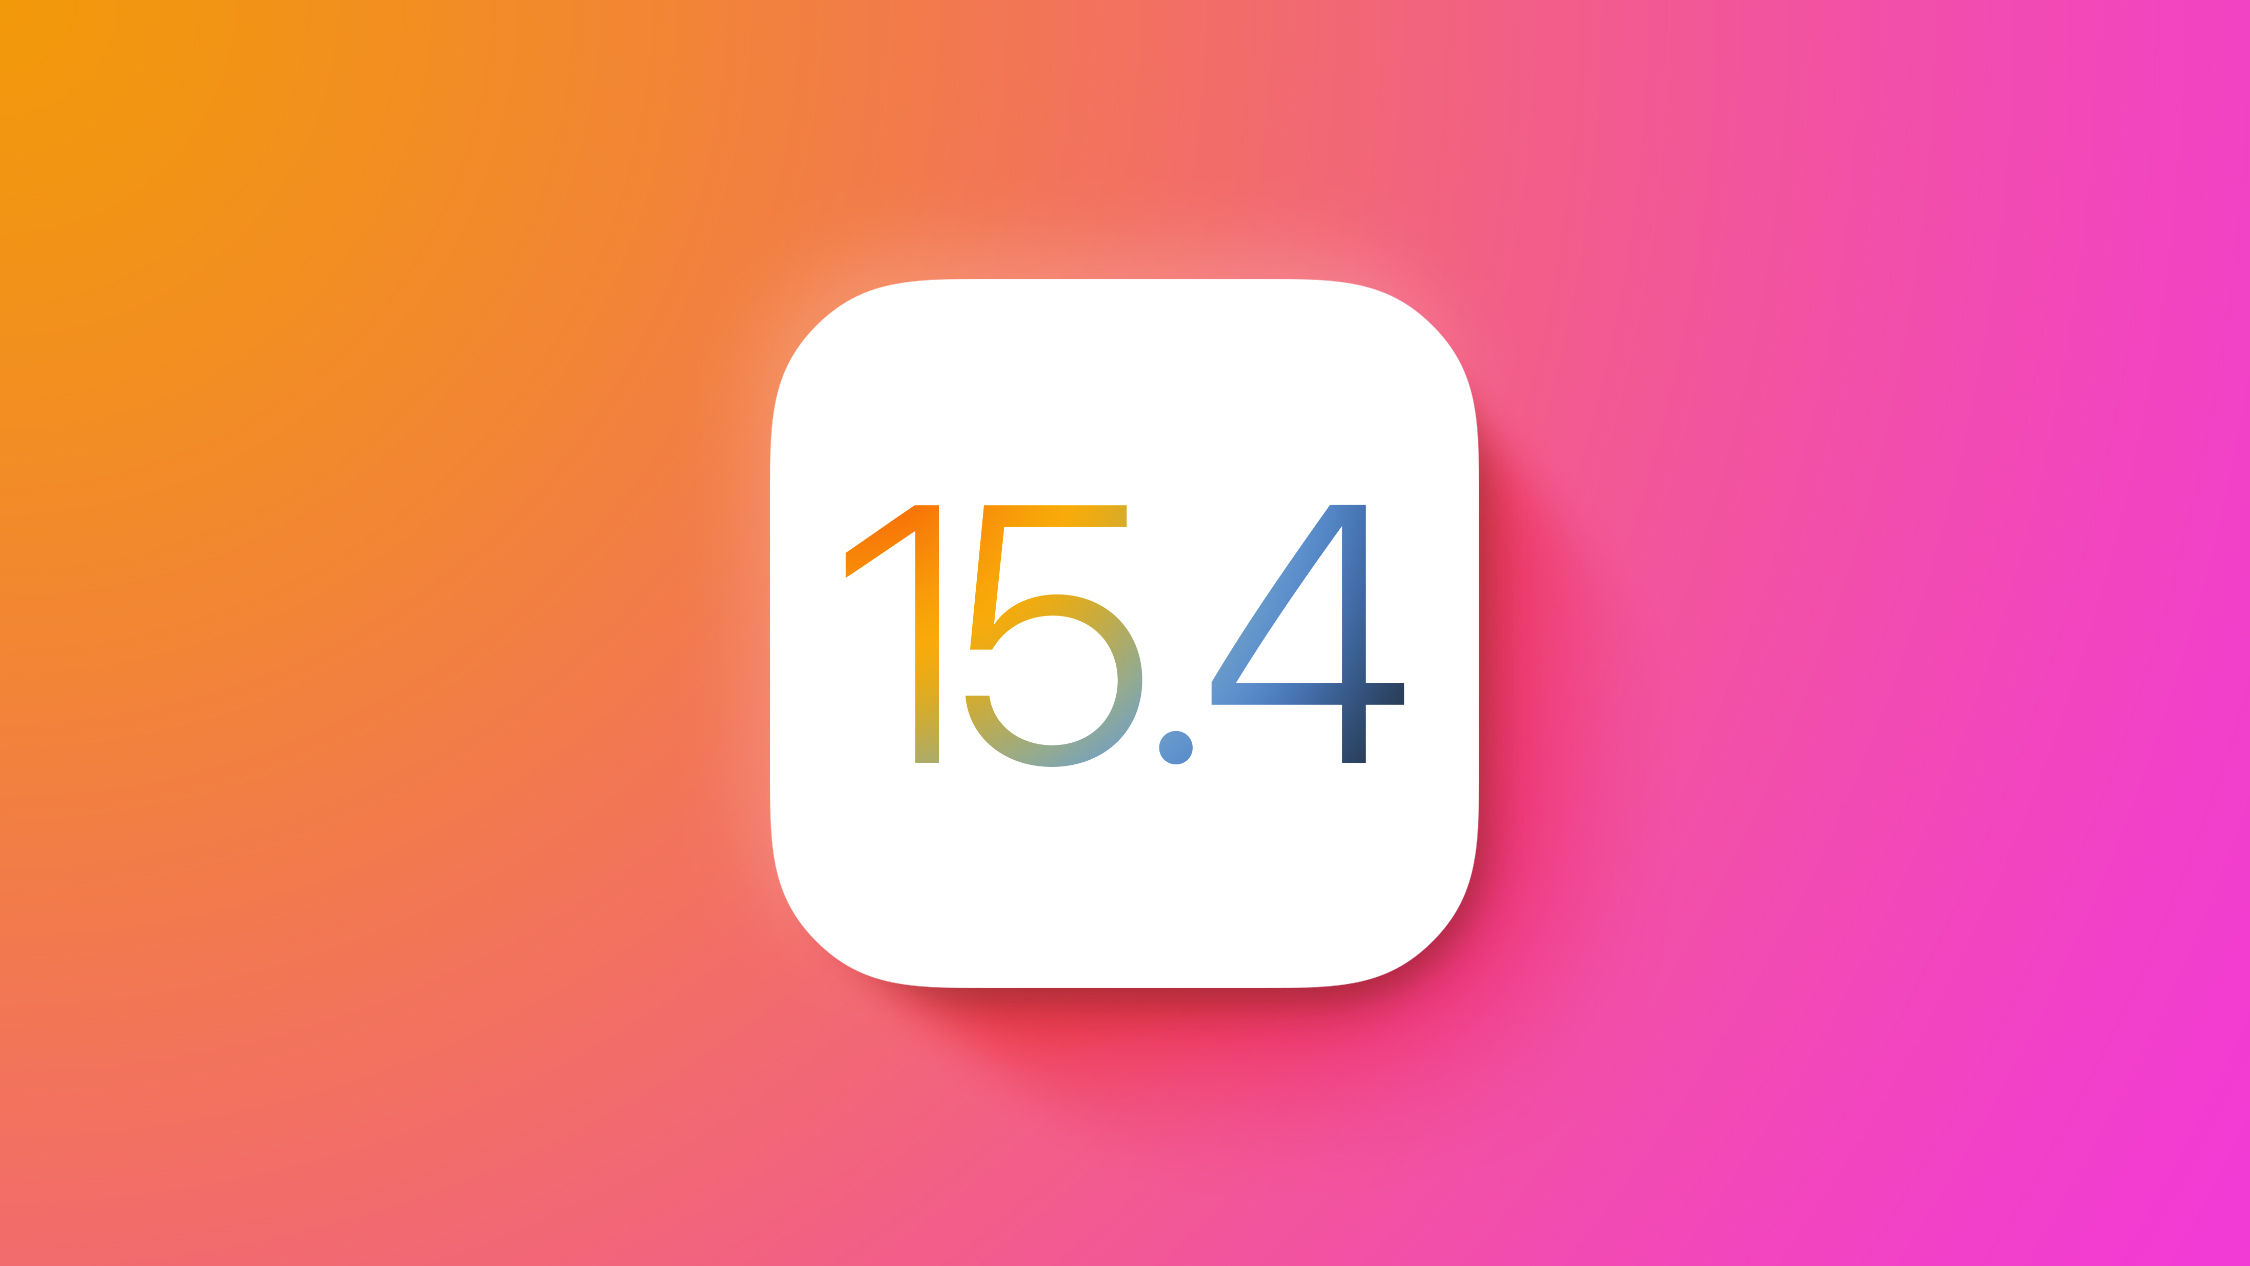 Apple Seeds First Public Betas of iOS 15.4 and iPadOS 15.4 With Universal Control, Face ID With Mask Support and More